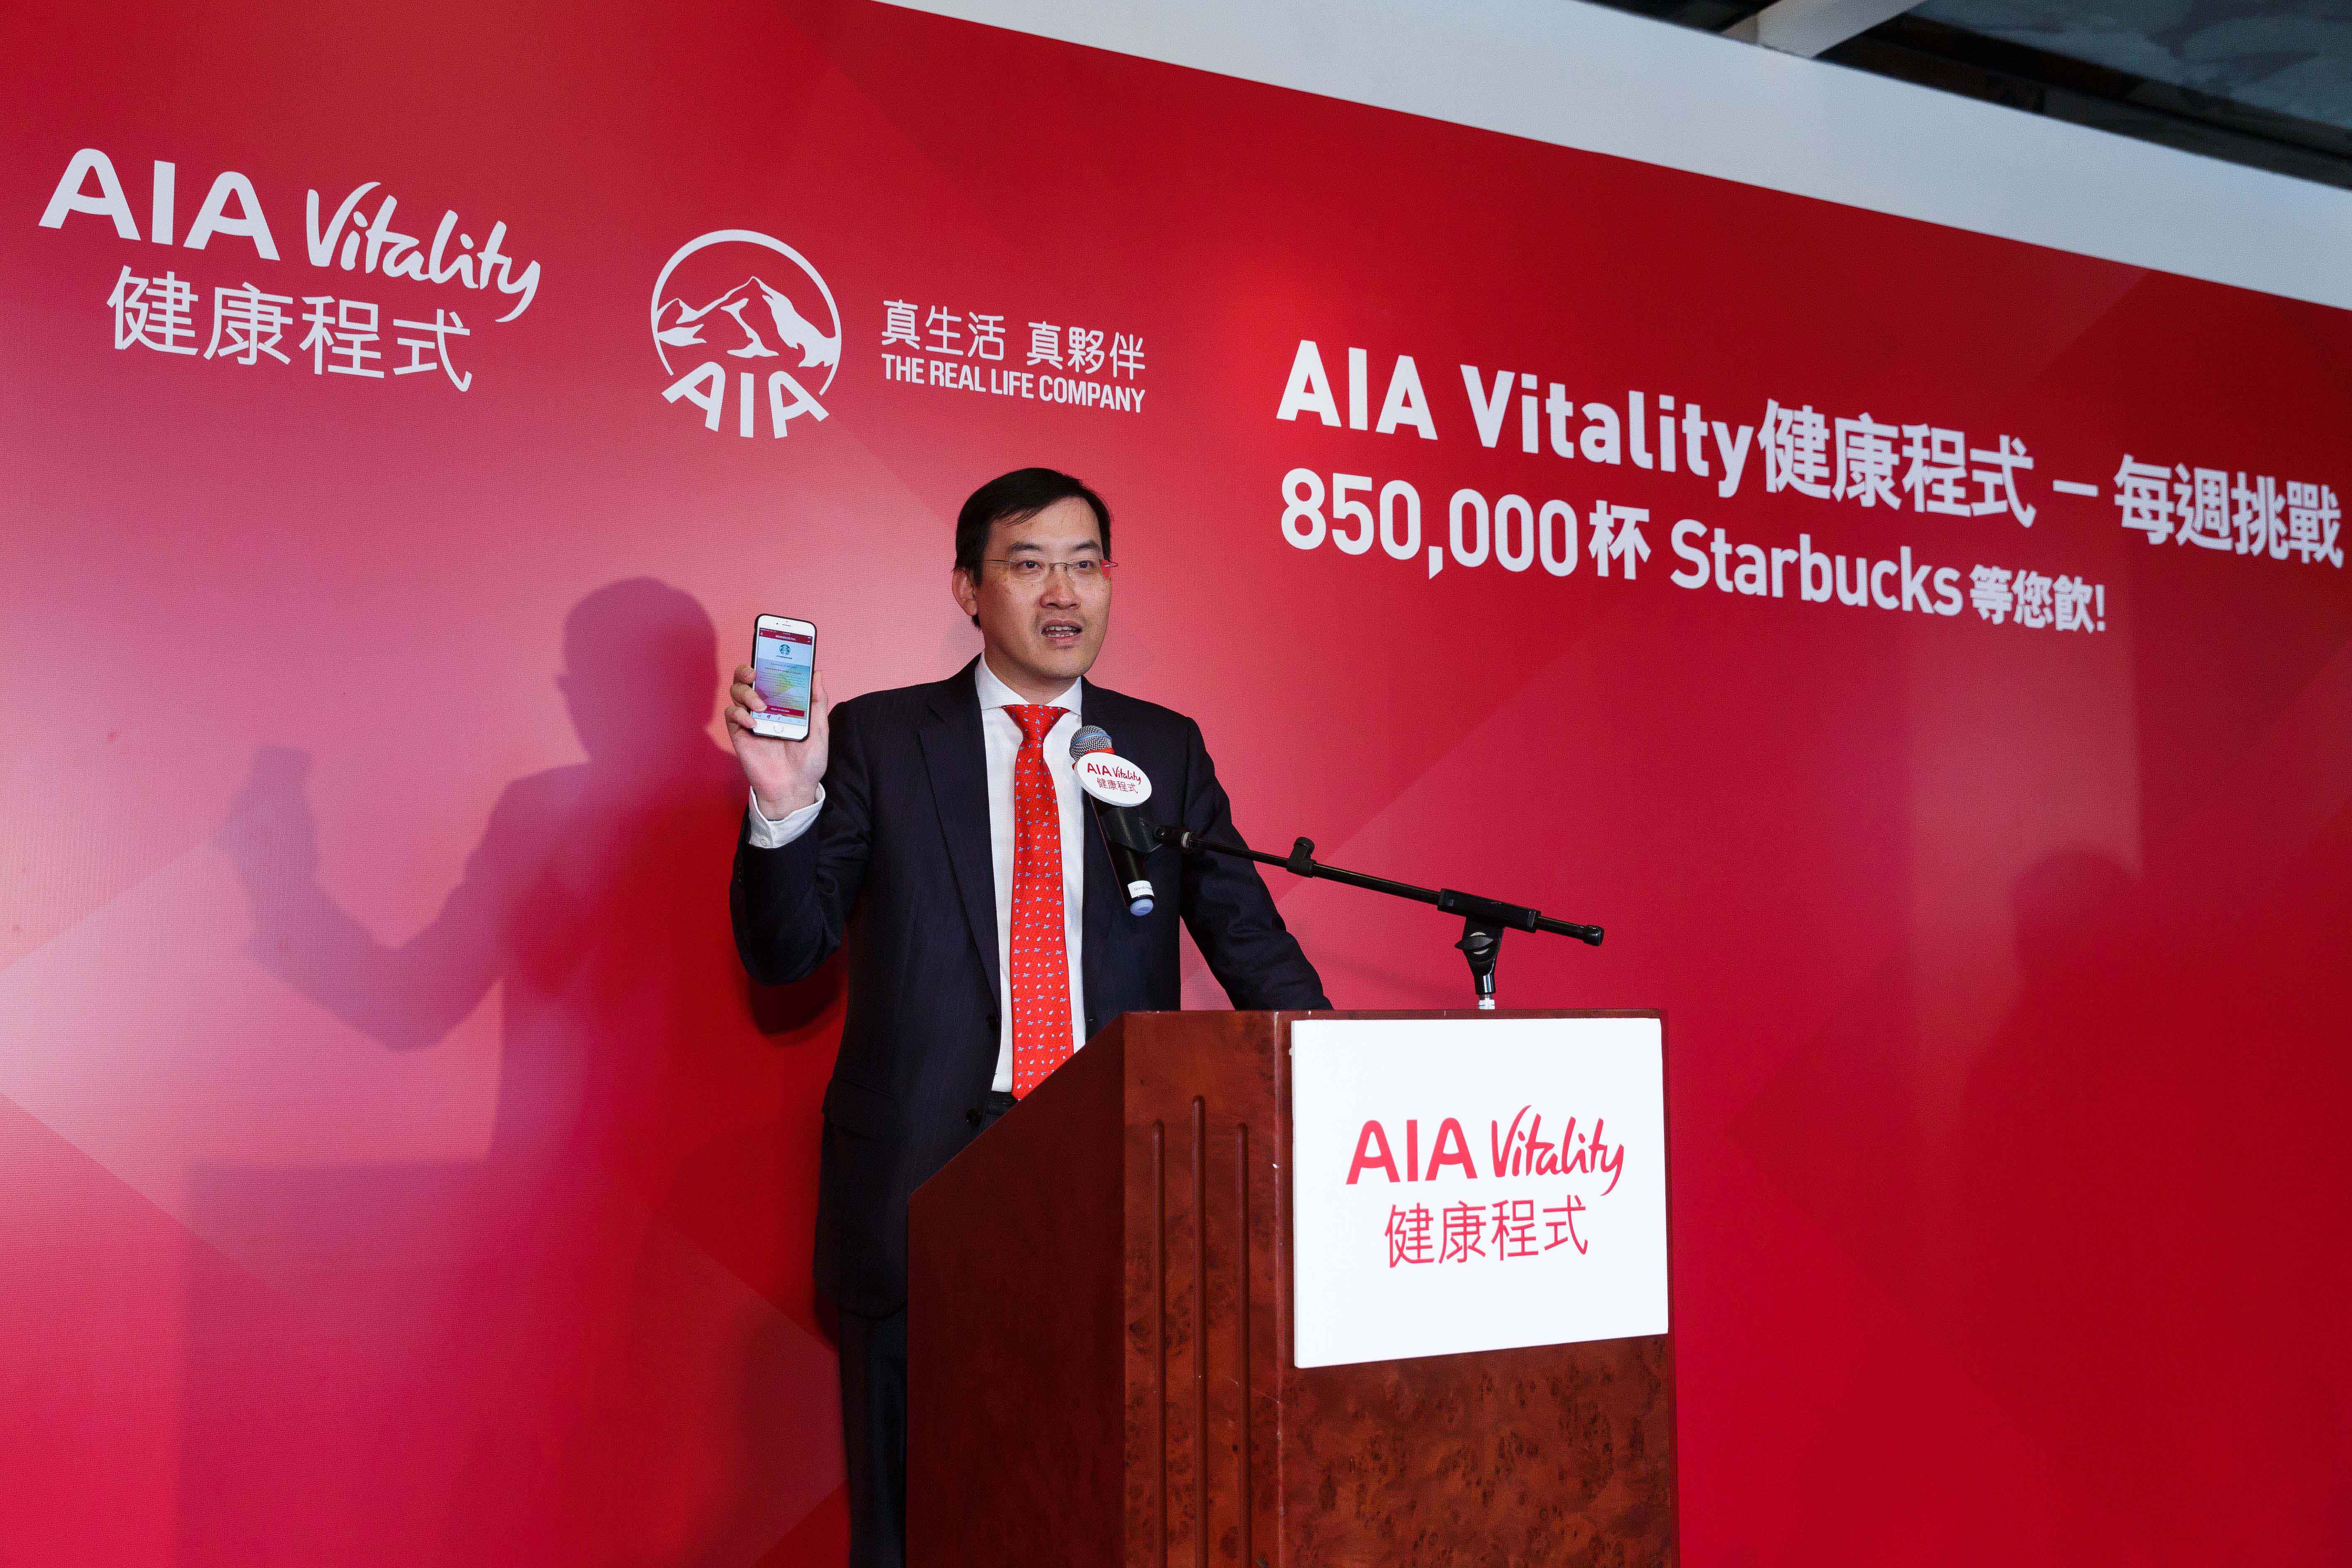 Customers who successfully complete the “AIA Vitality Weekly Challenge” can redeem a free Starbucks drink* by presenting the e-coupon at selected Starbucks branches in Hong Kong and Macau. *Starbucks handcrafted beverage equivalent of HK$/MOP25 value or below. Any amount above HK$/MOP25 will be charged.